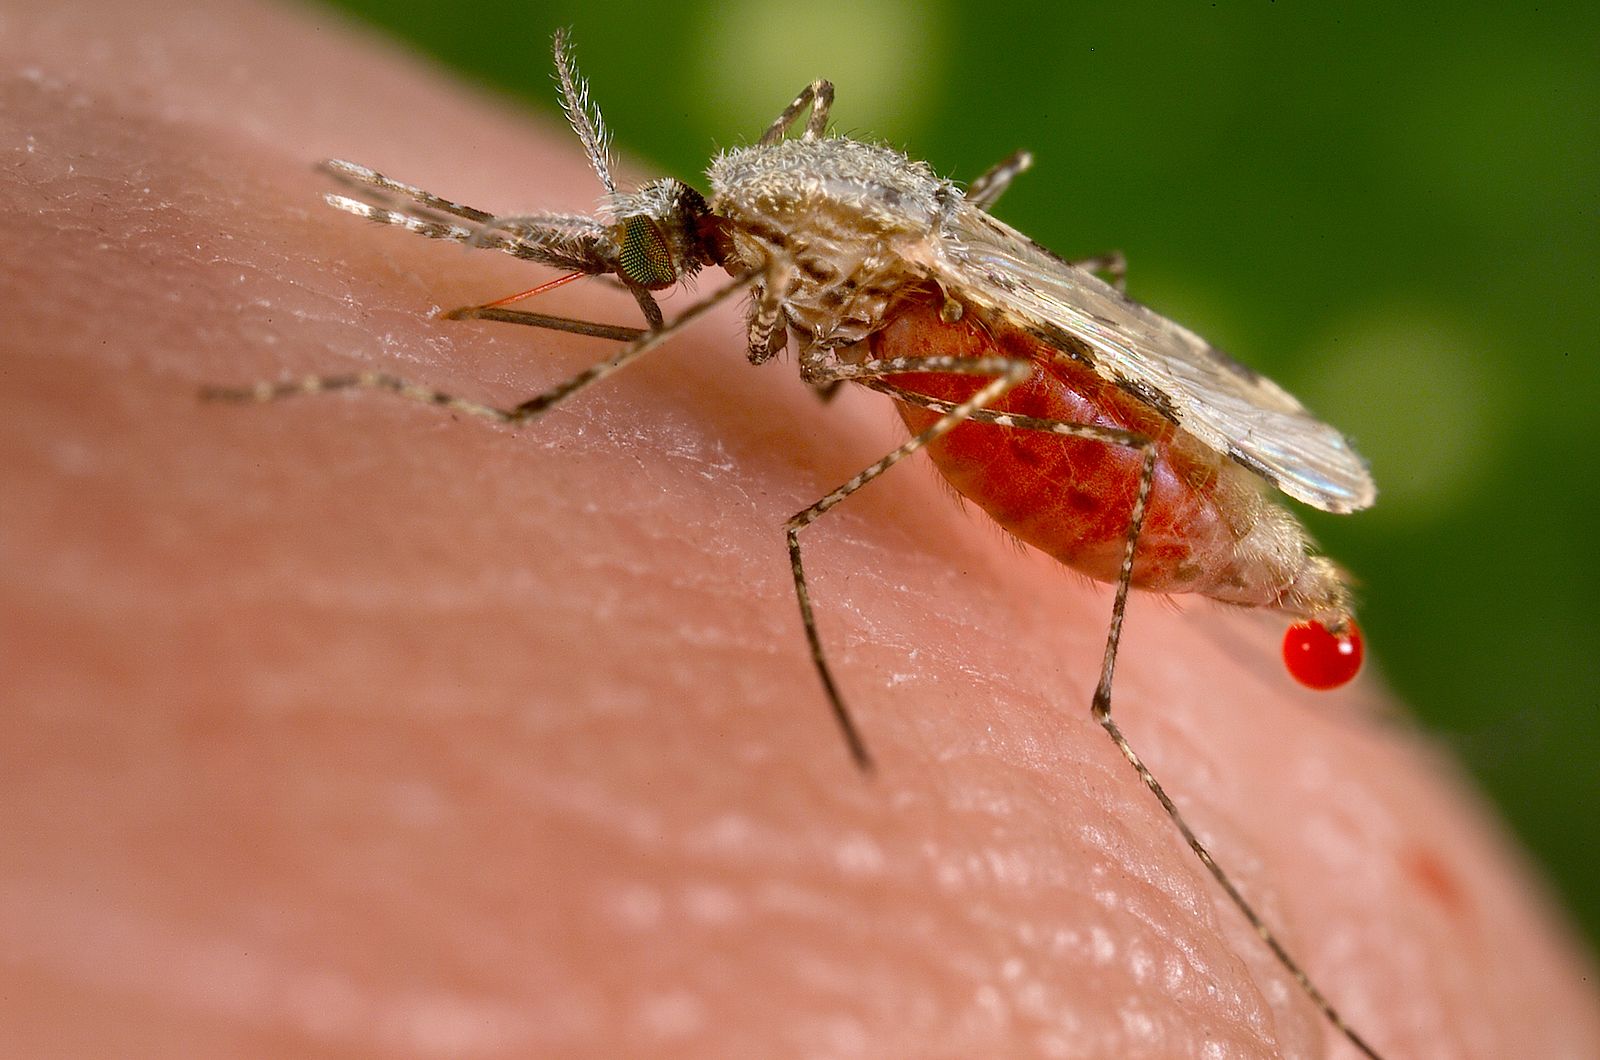 An Anopheles stephensi mosquito feeding on blood from a human host